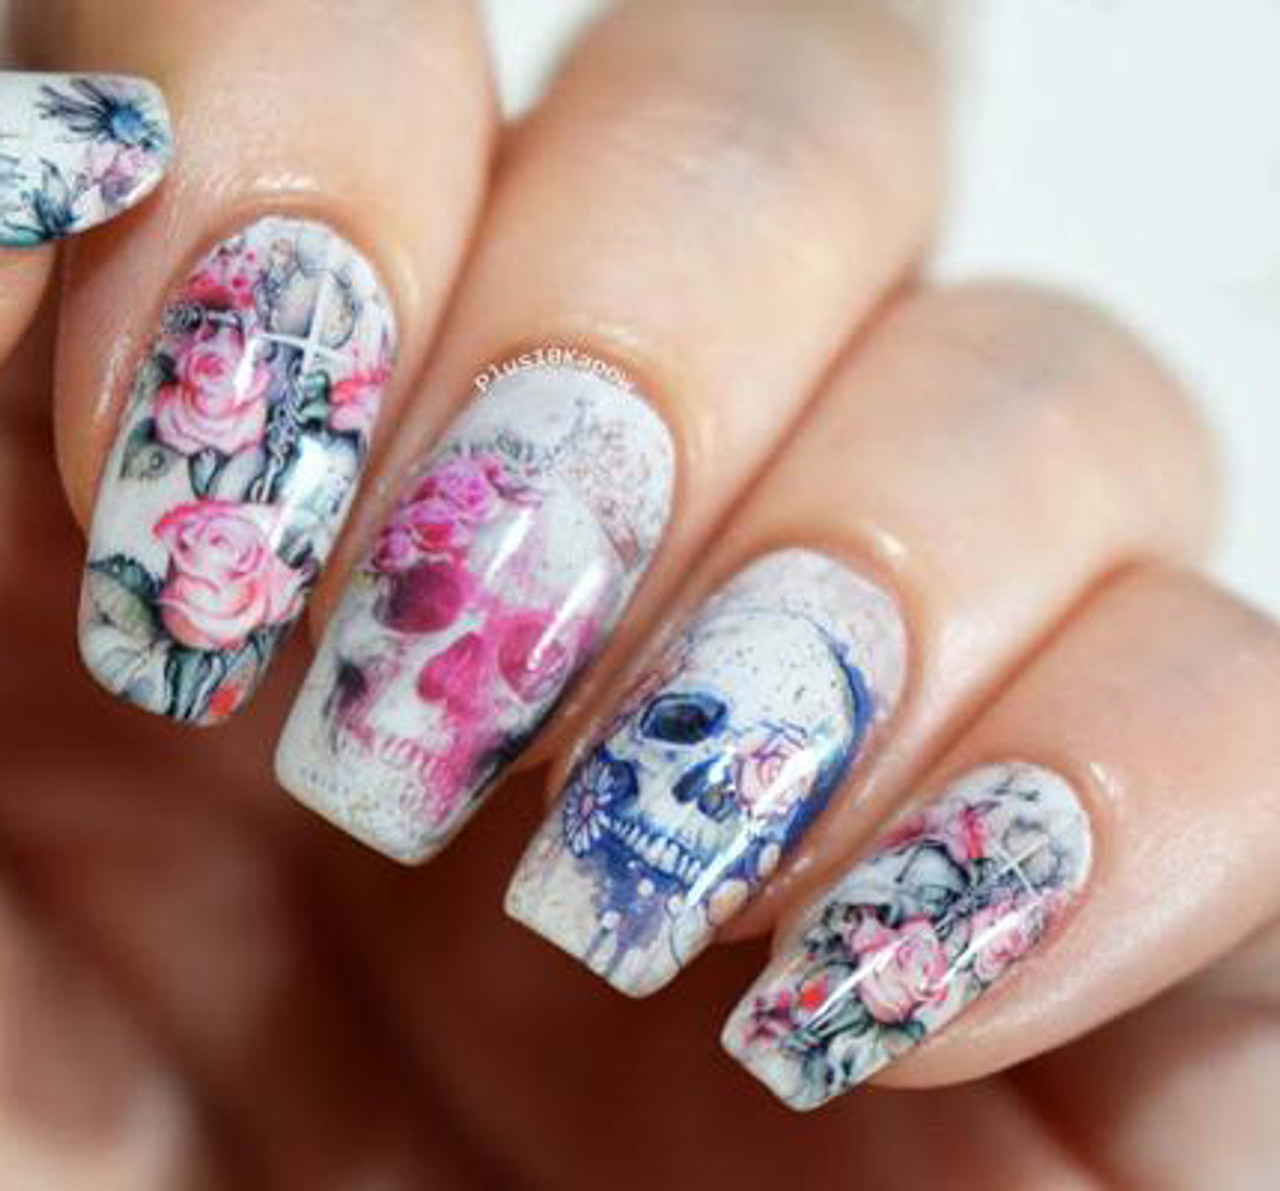 Fabulous Nails with Water Decals | daily charme